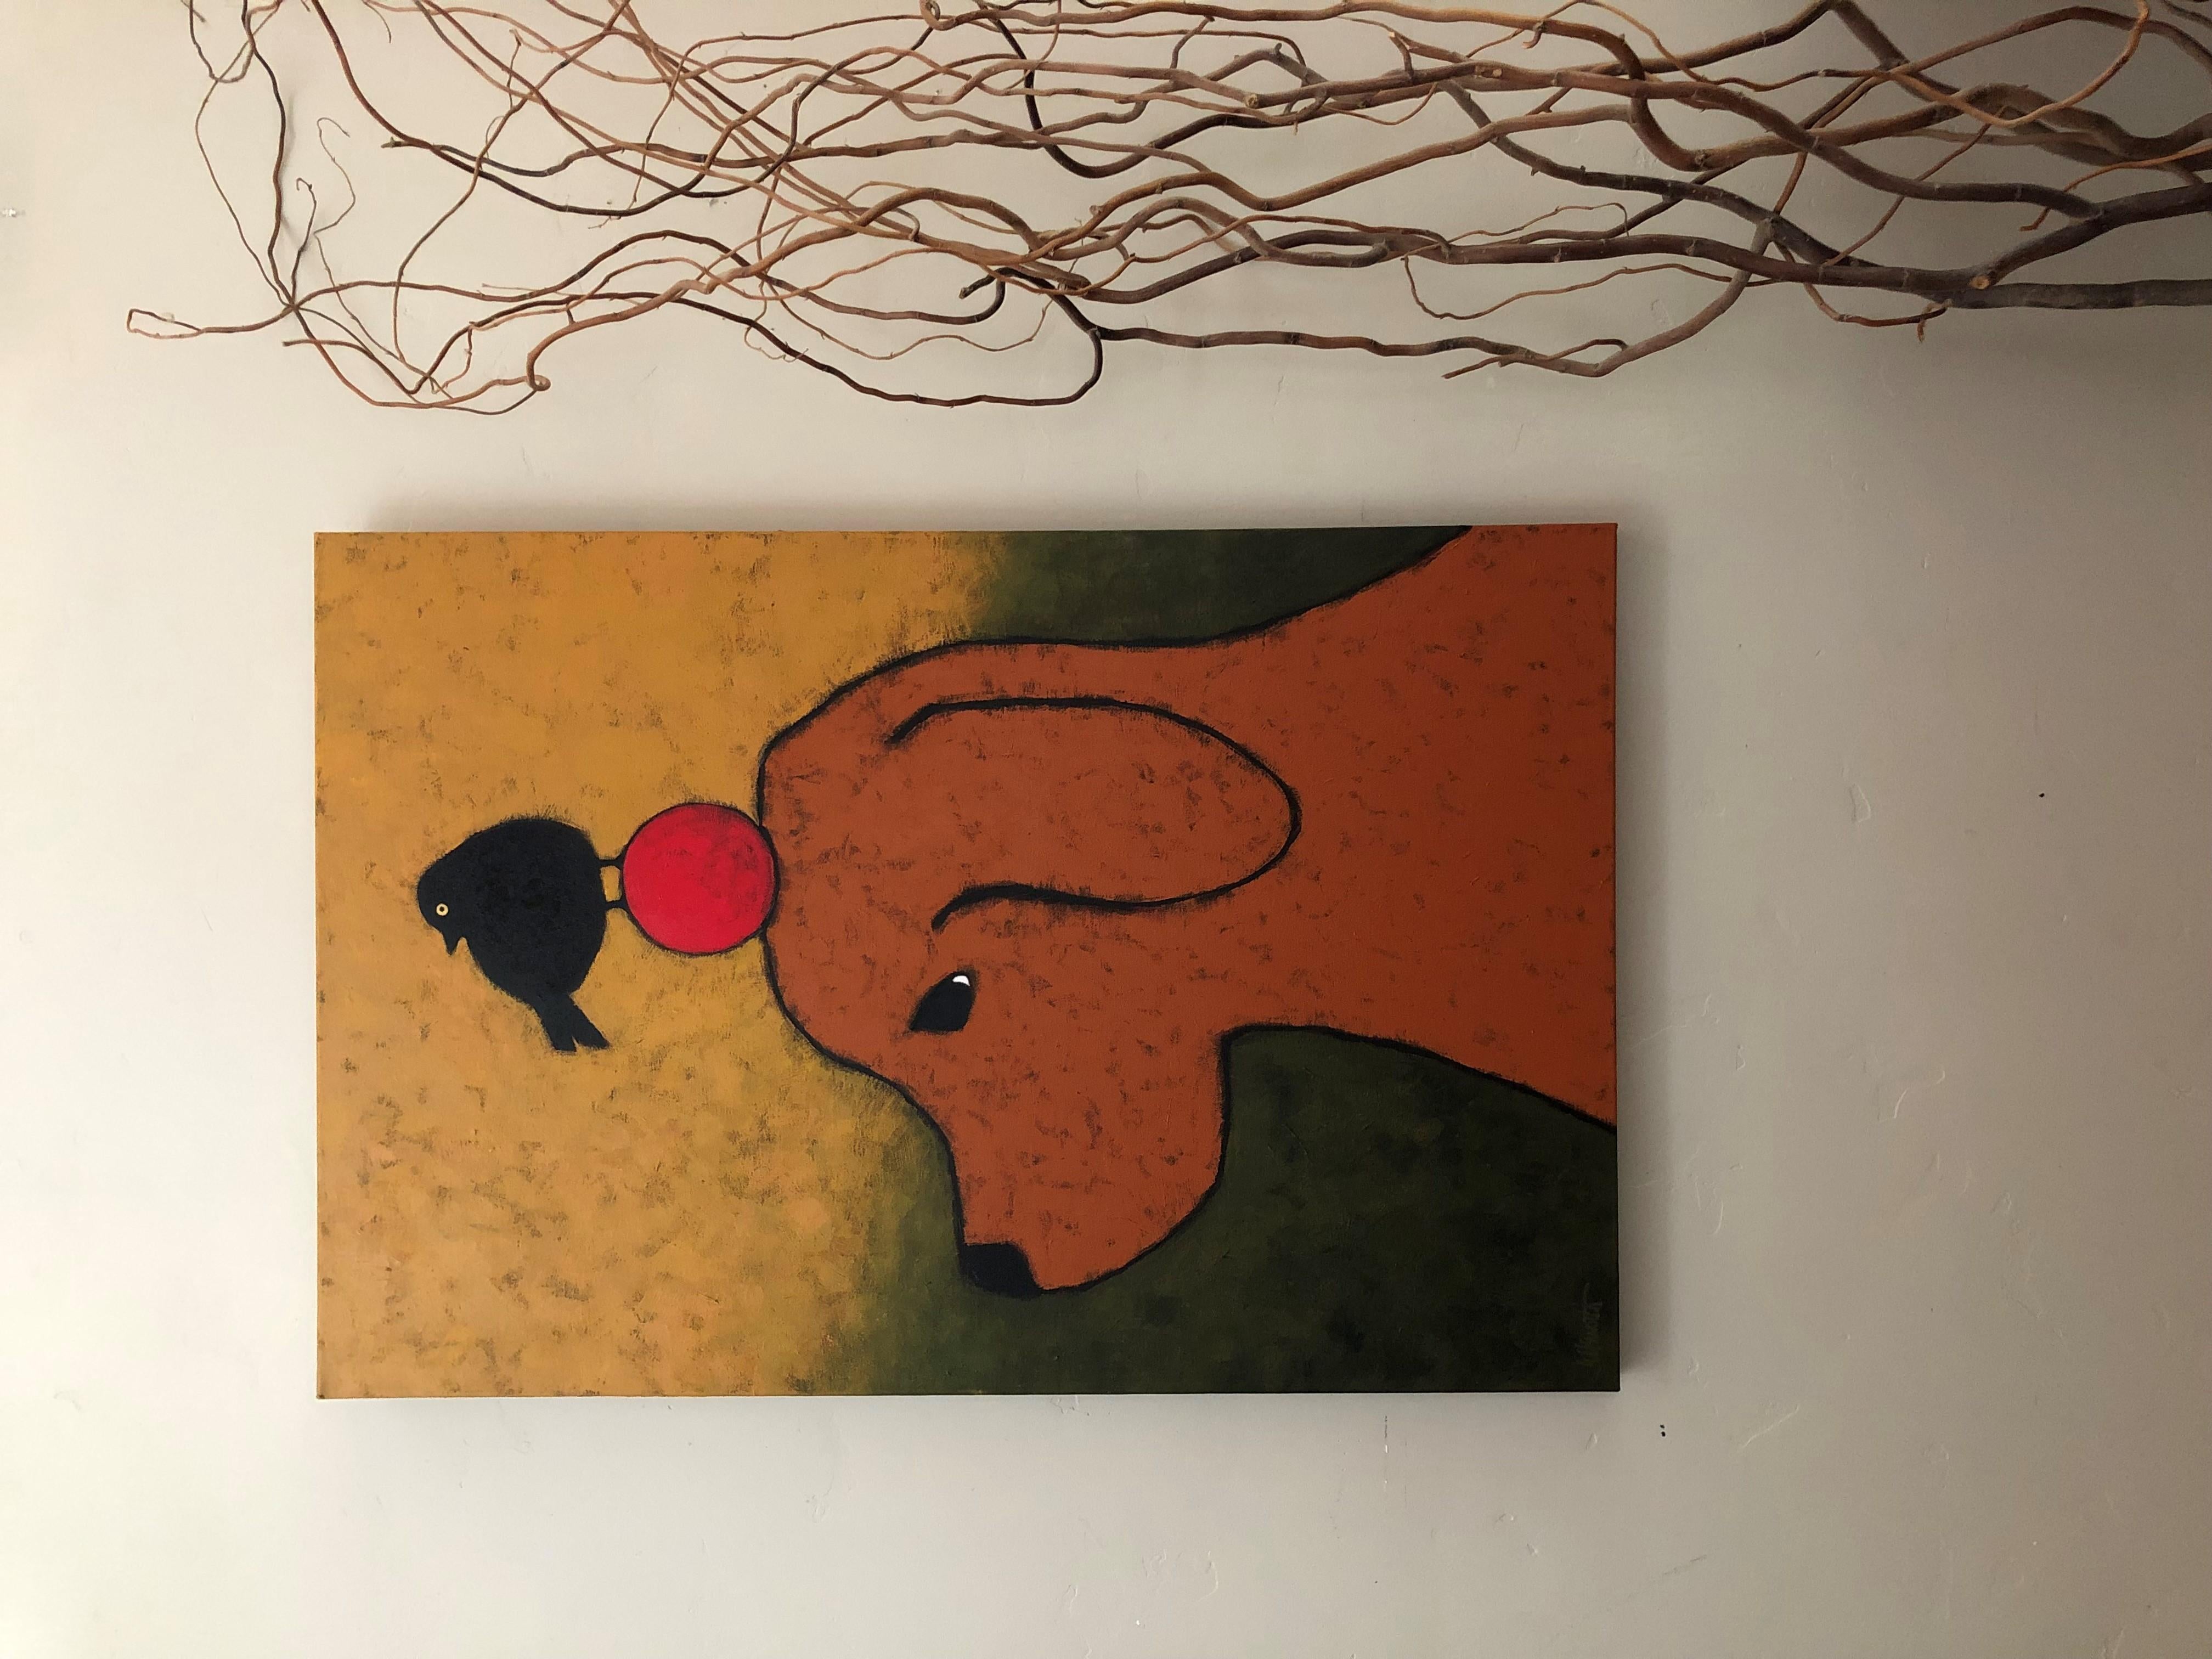 <p>Artist Comments<br>Artist Jaime Ellsworth captures a clever brown dog skillfully balancing a red ball and a black bird on its head. With curious gazes, the critters turn to their right as if something has piqued their interest. The two-tone